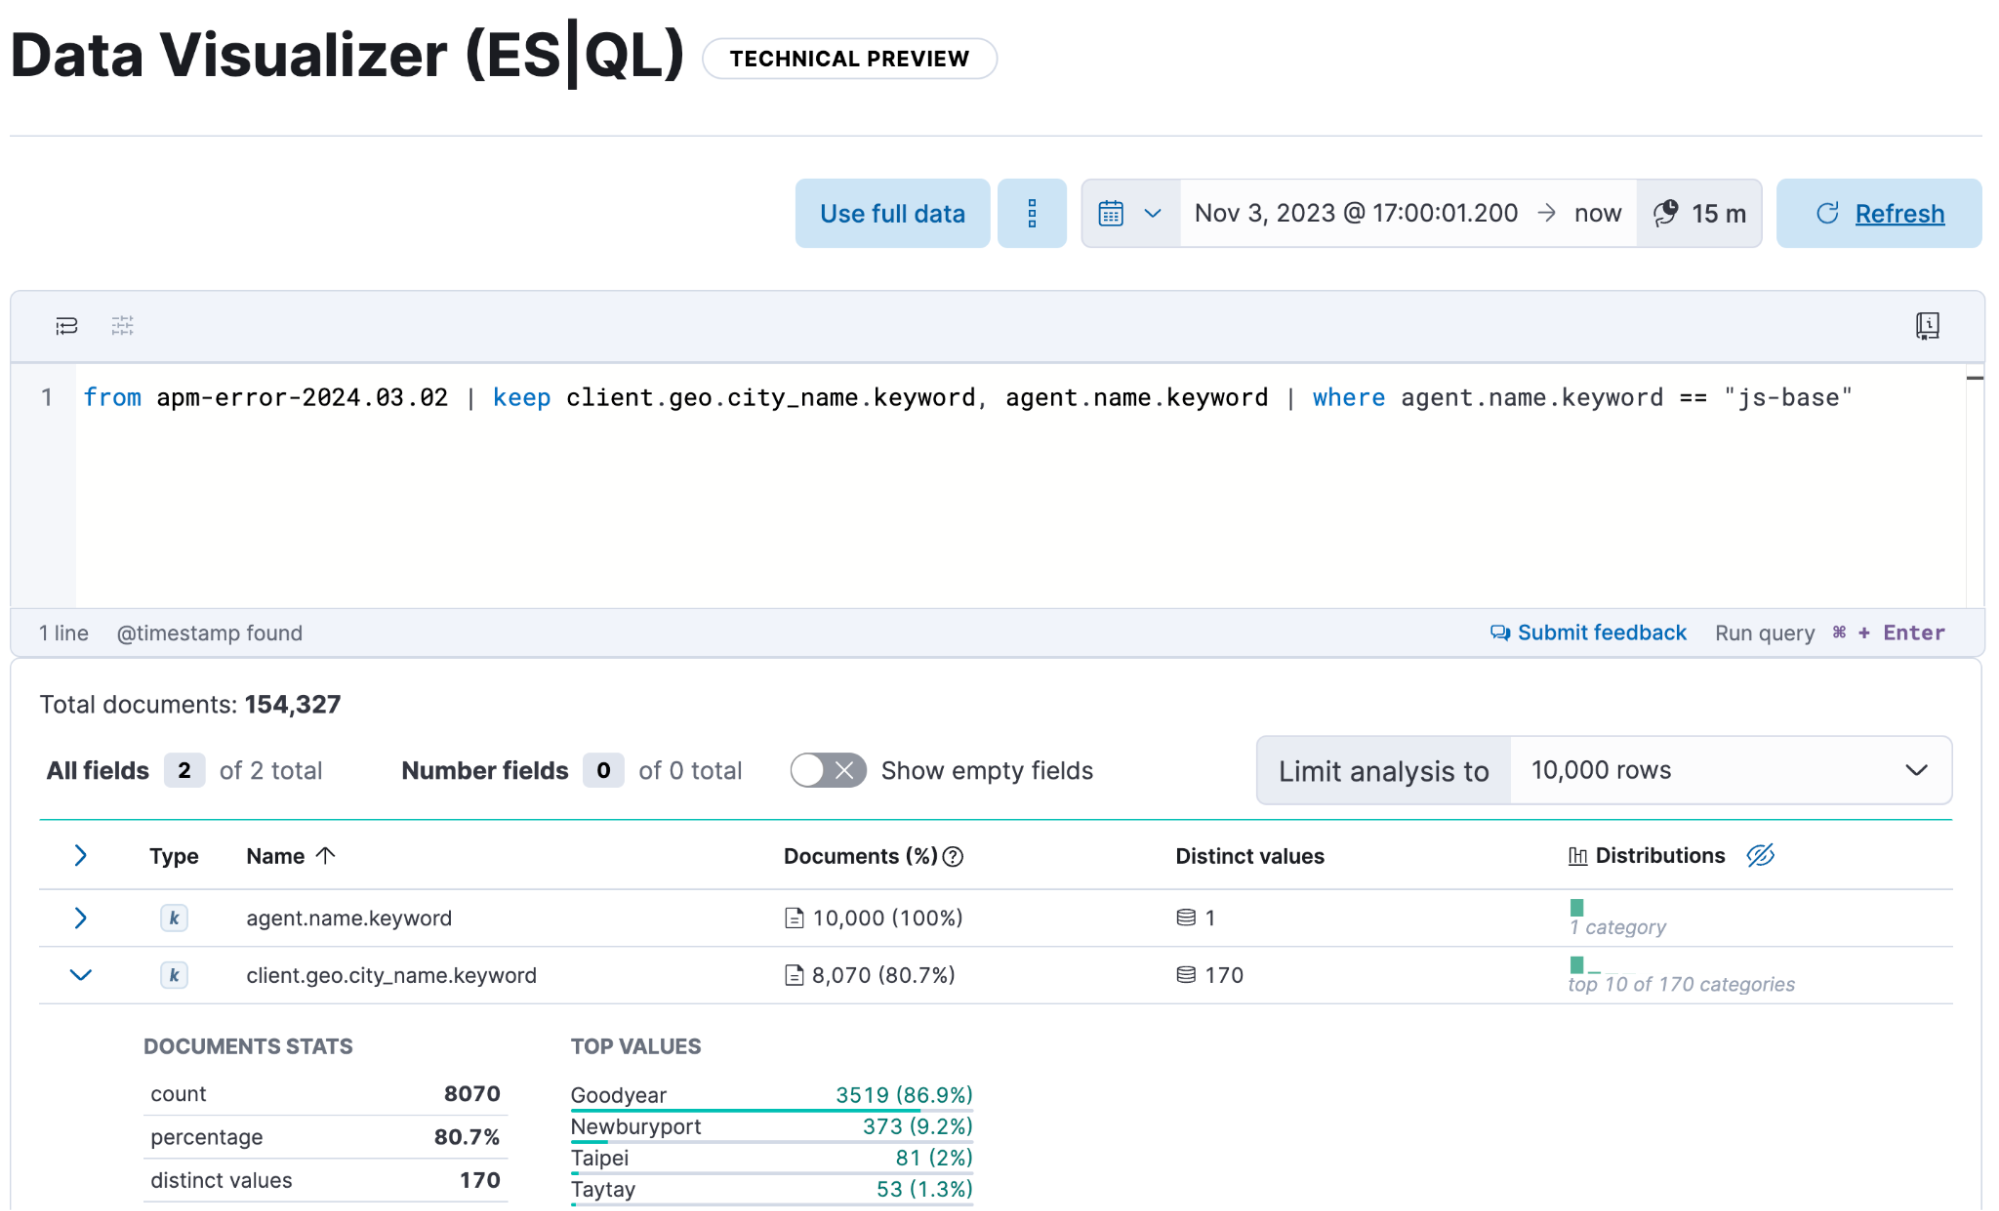 An image of the new Data Visualizer for ES|QL.